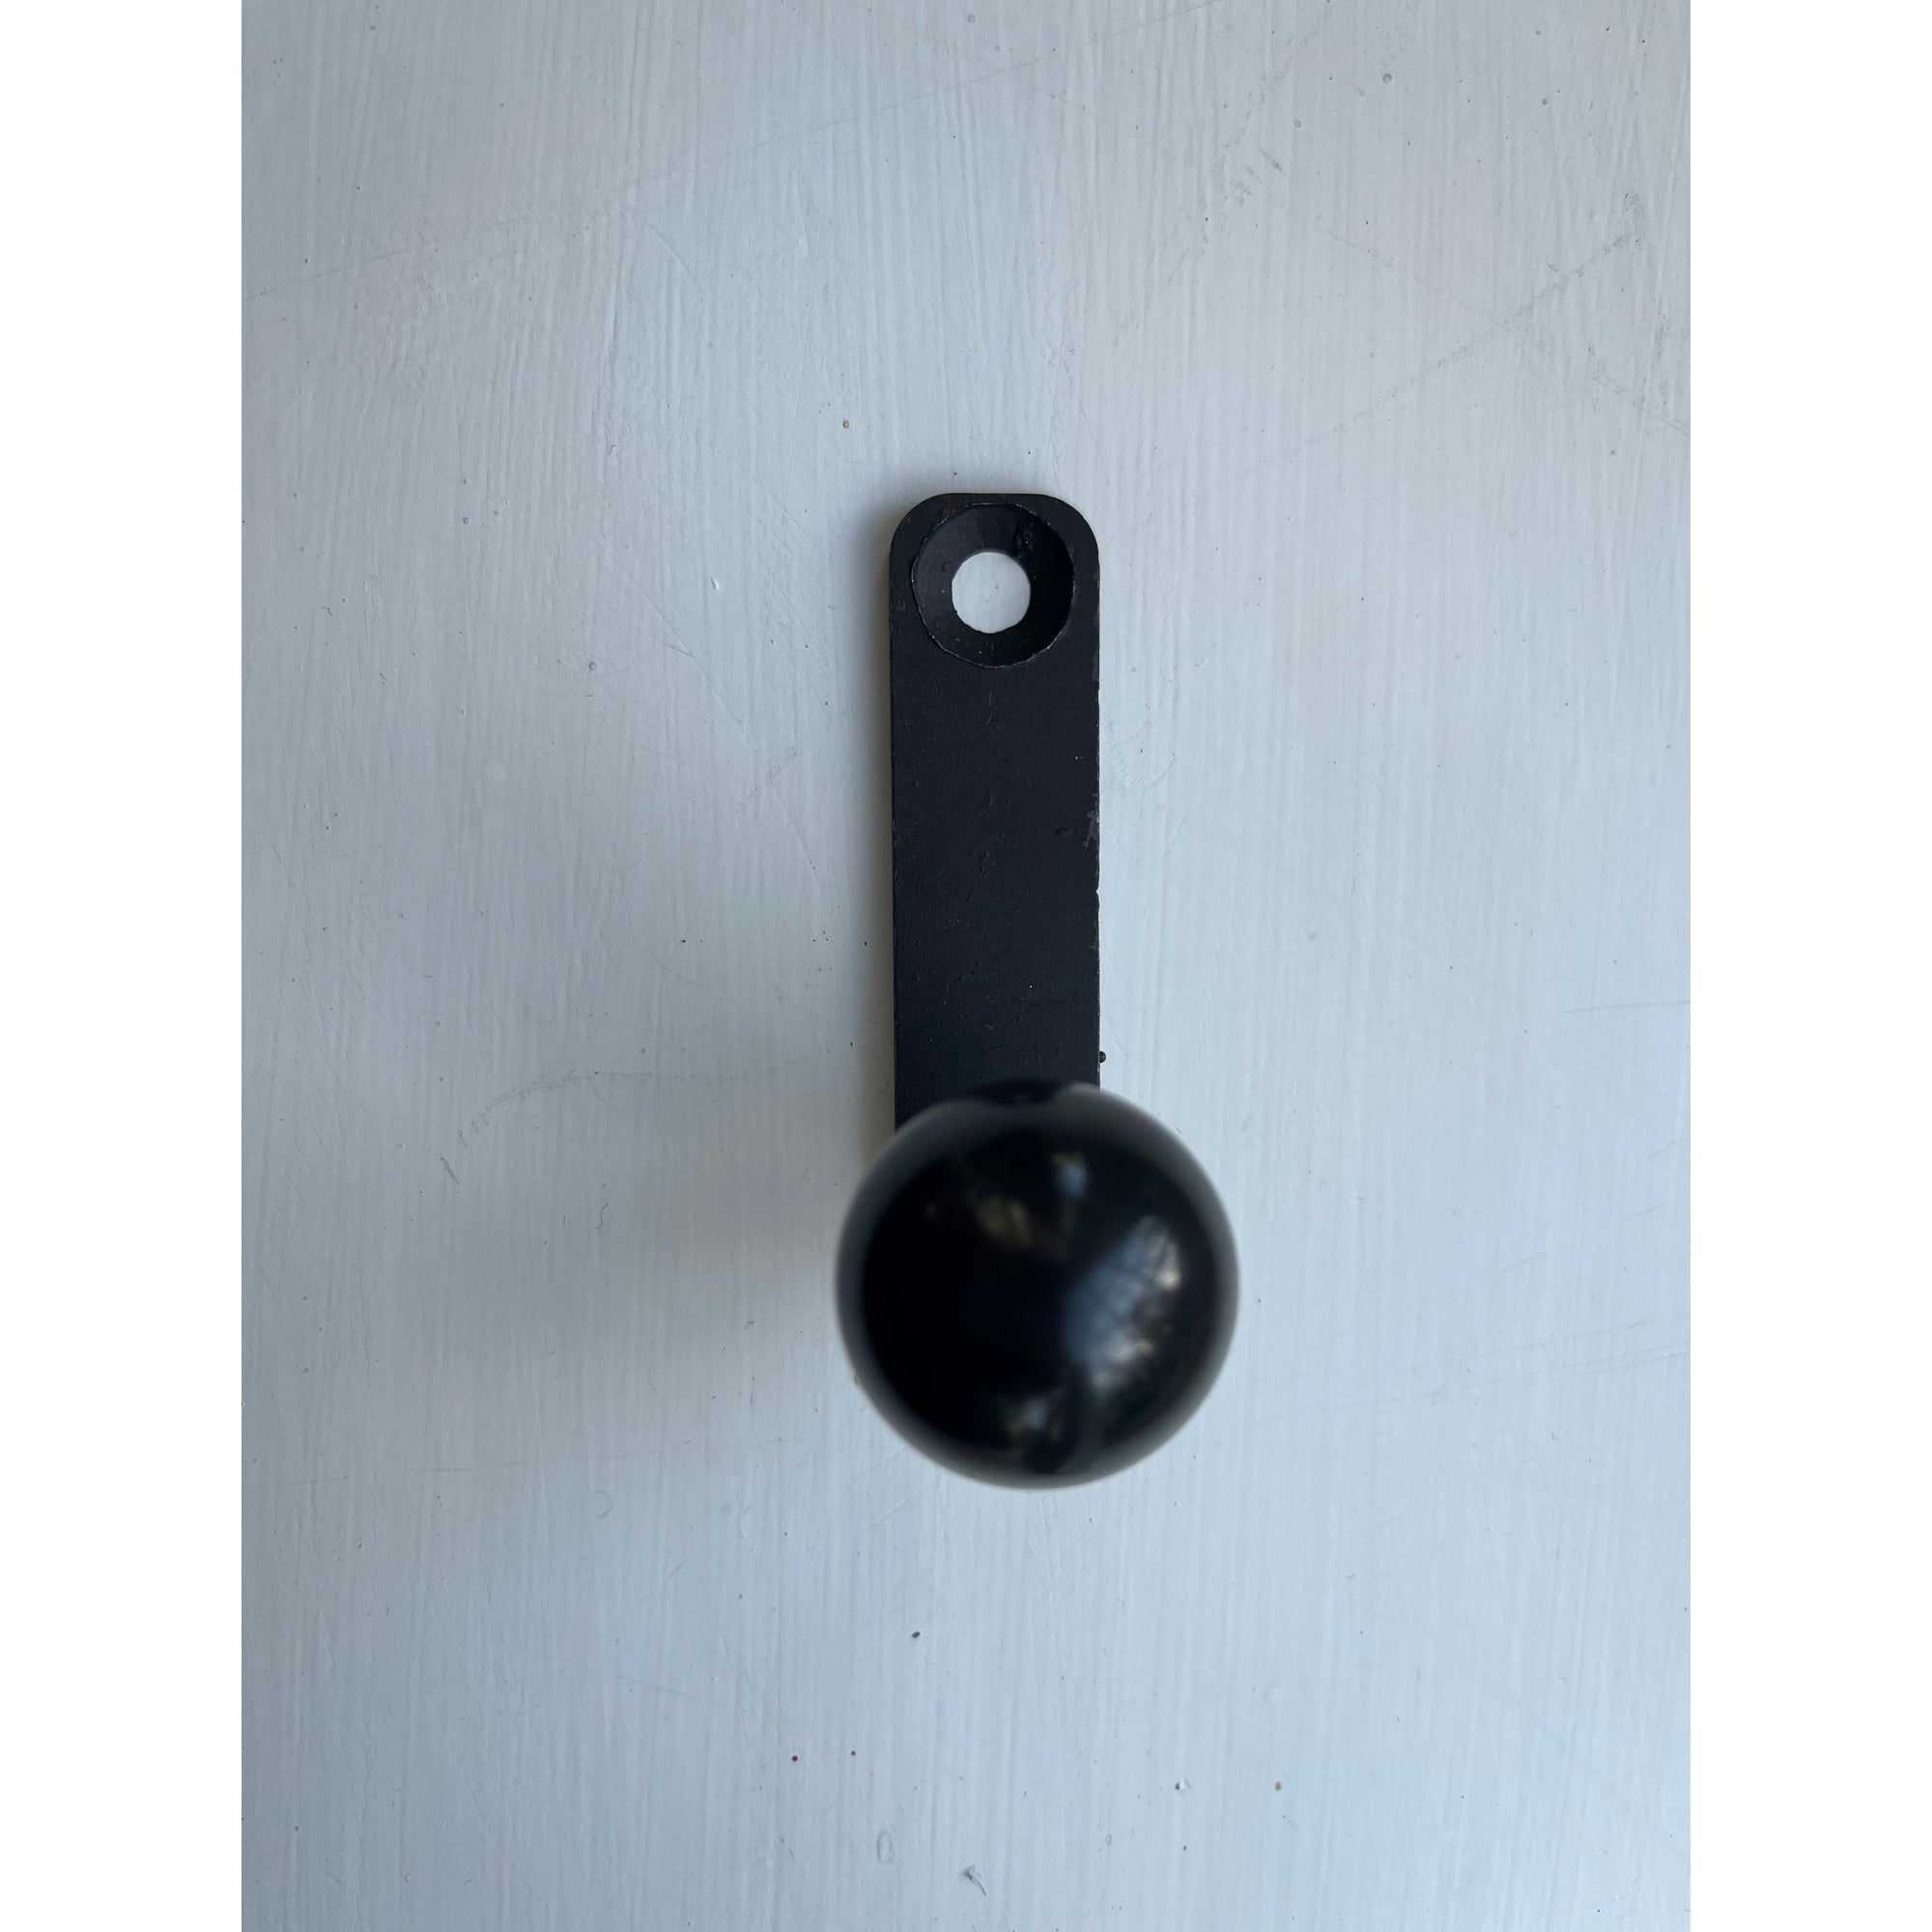 Handle for Vista stove - replacement part